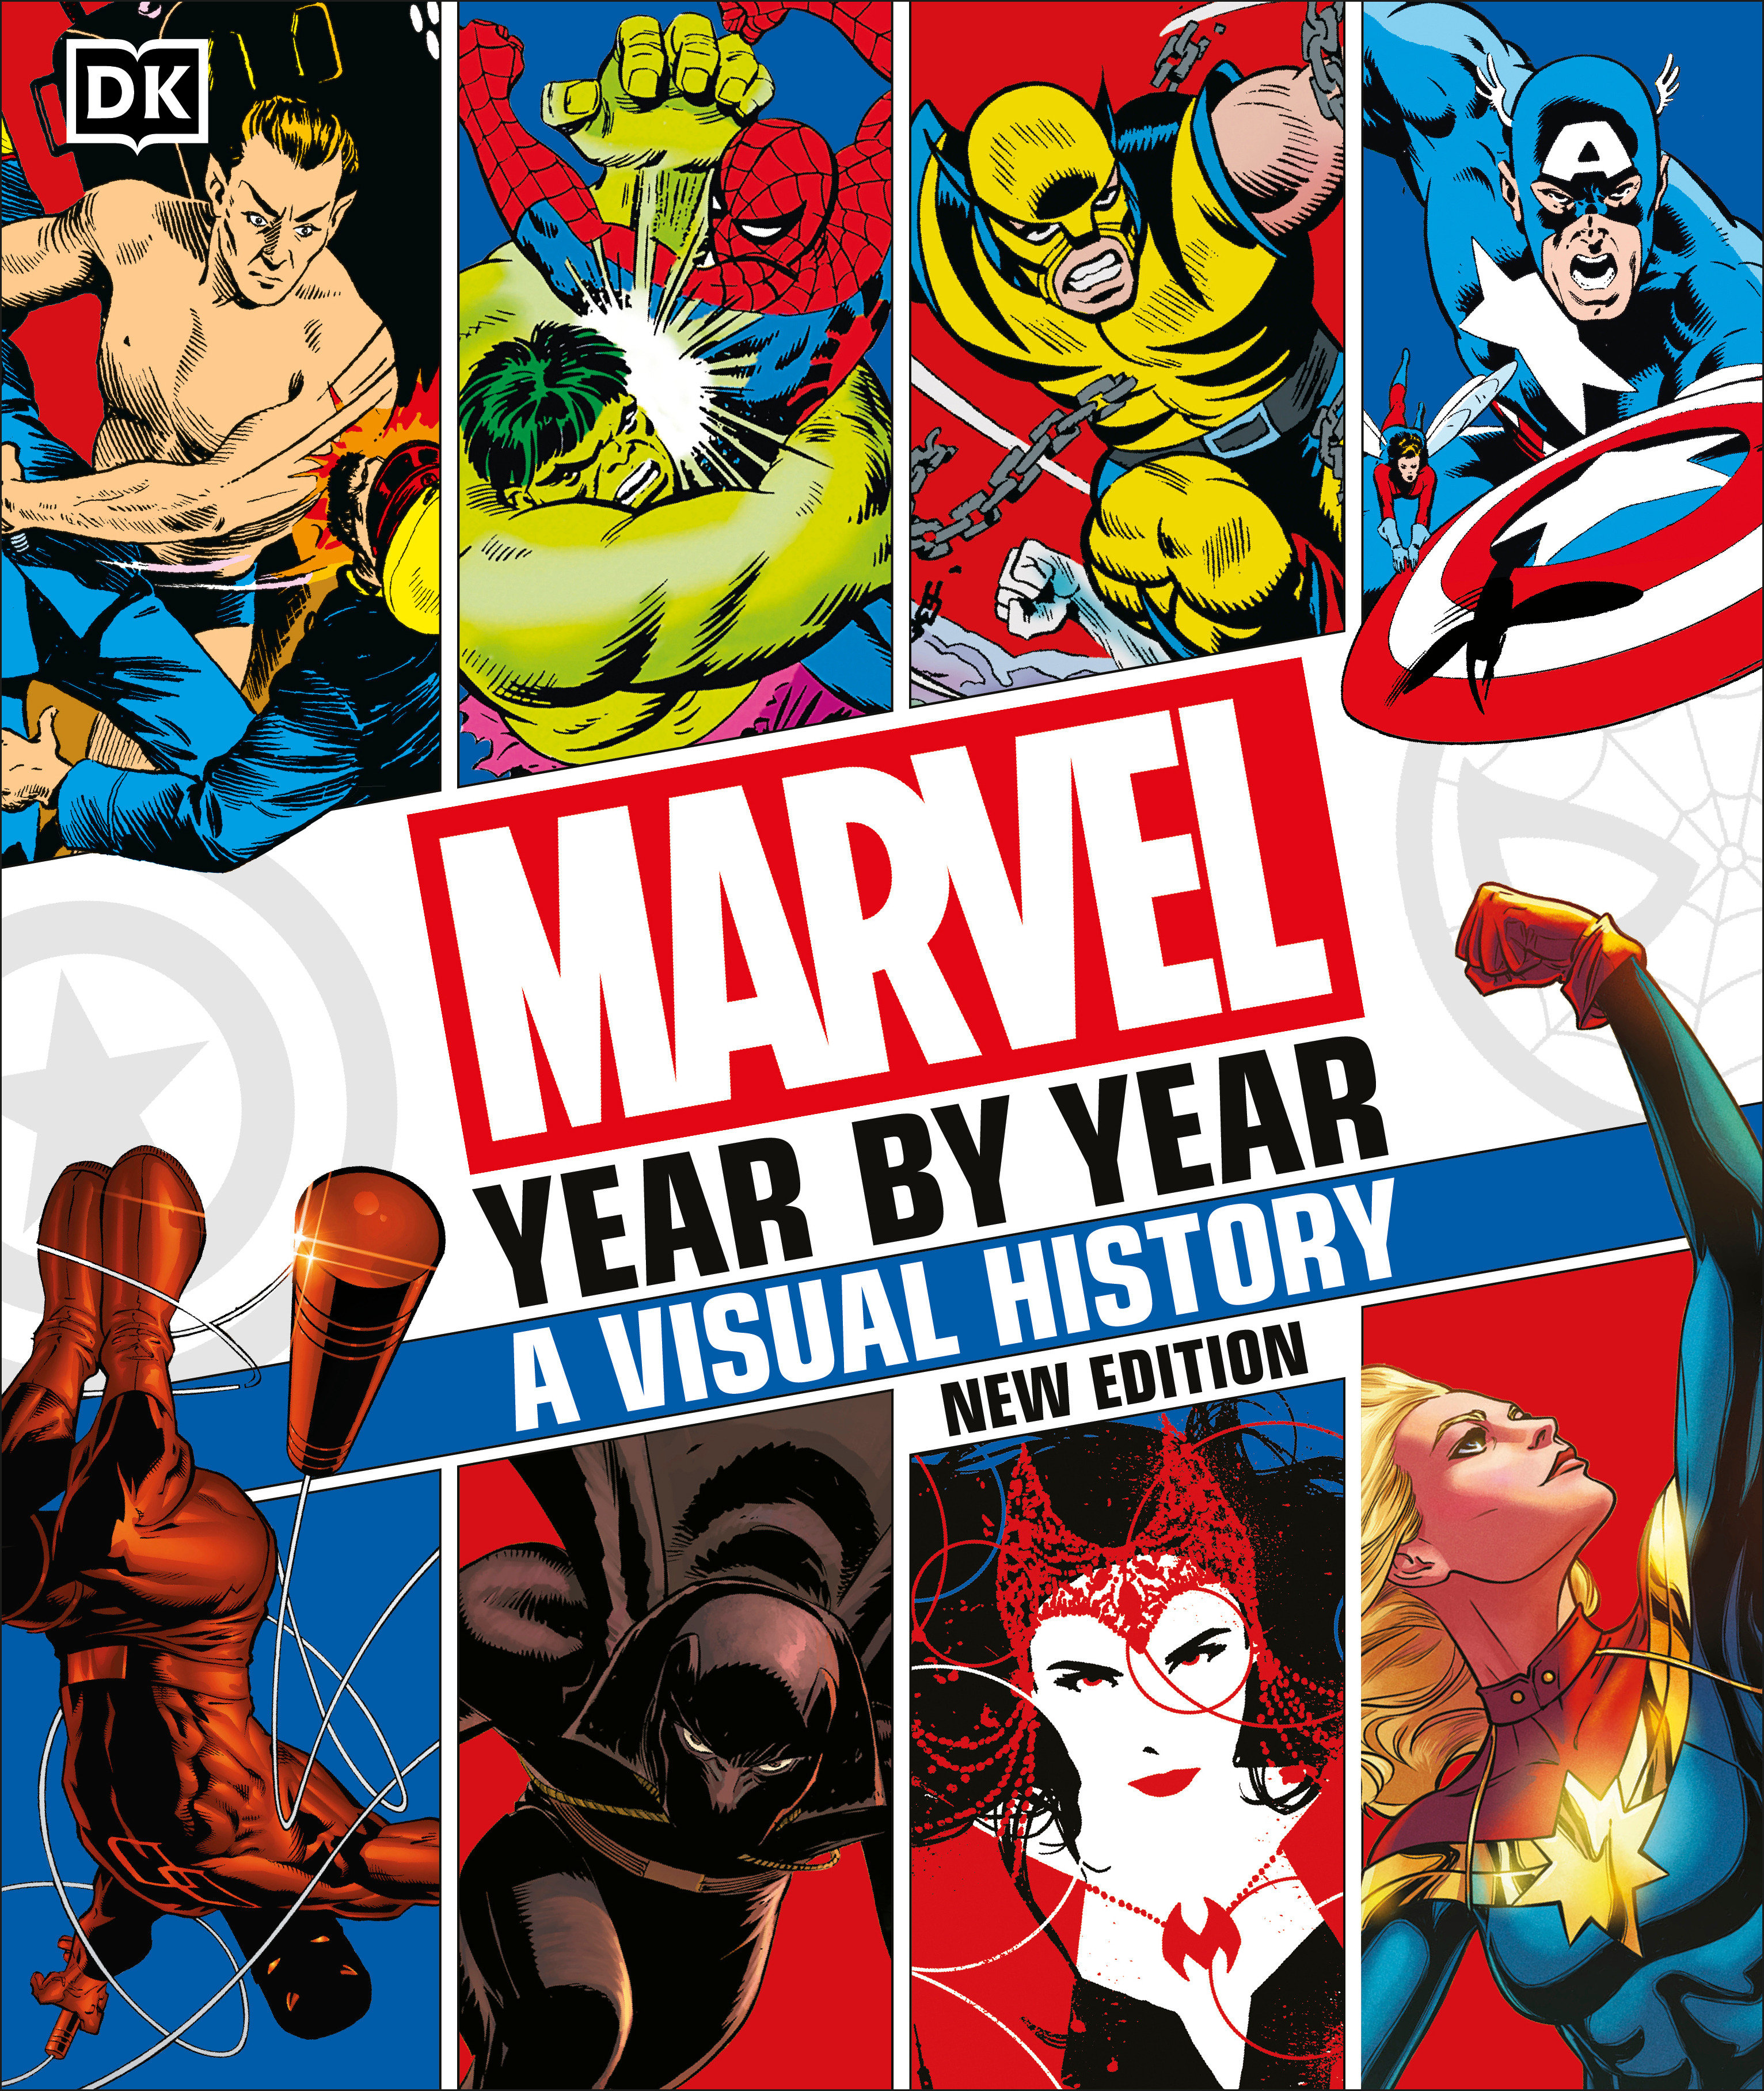 Marvel Year by Year Visual History Hardcover New Edition